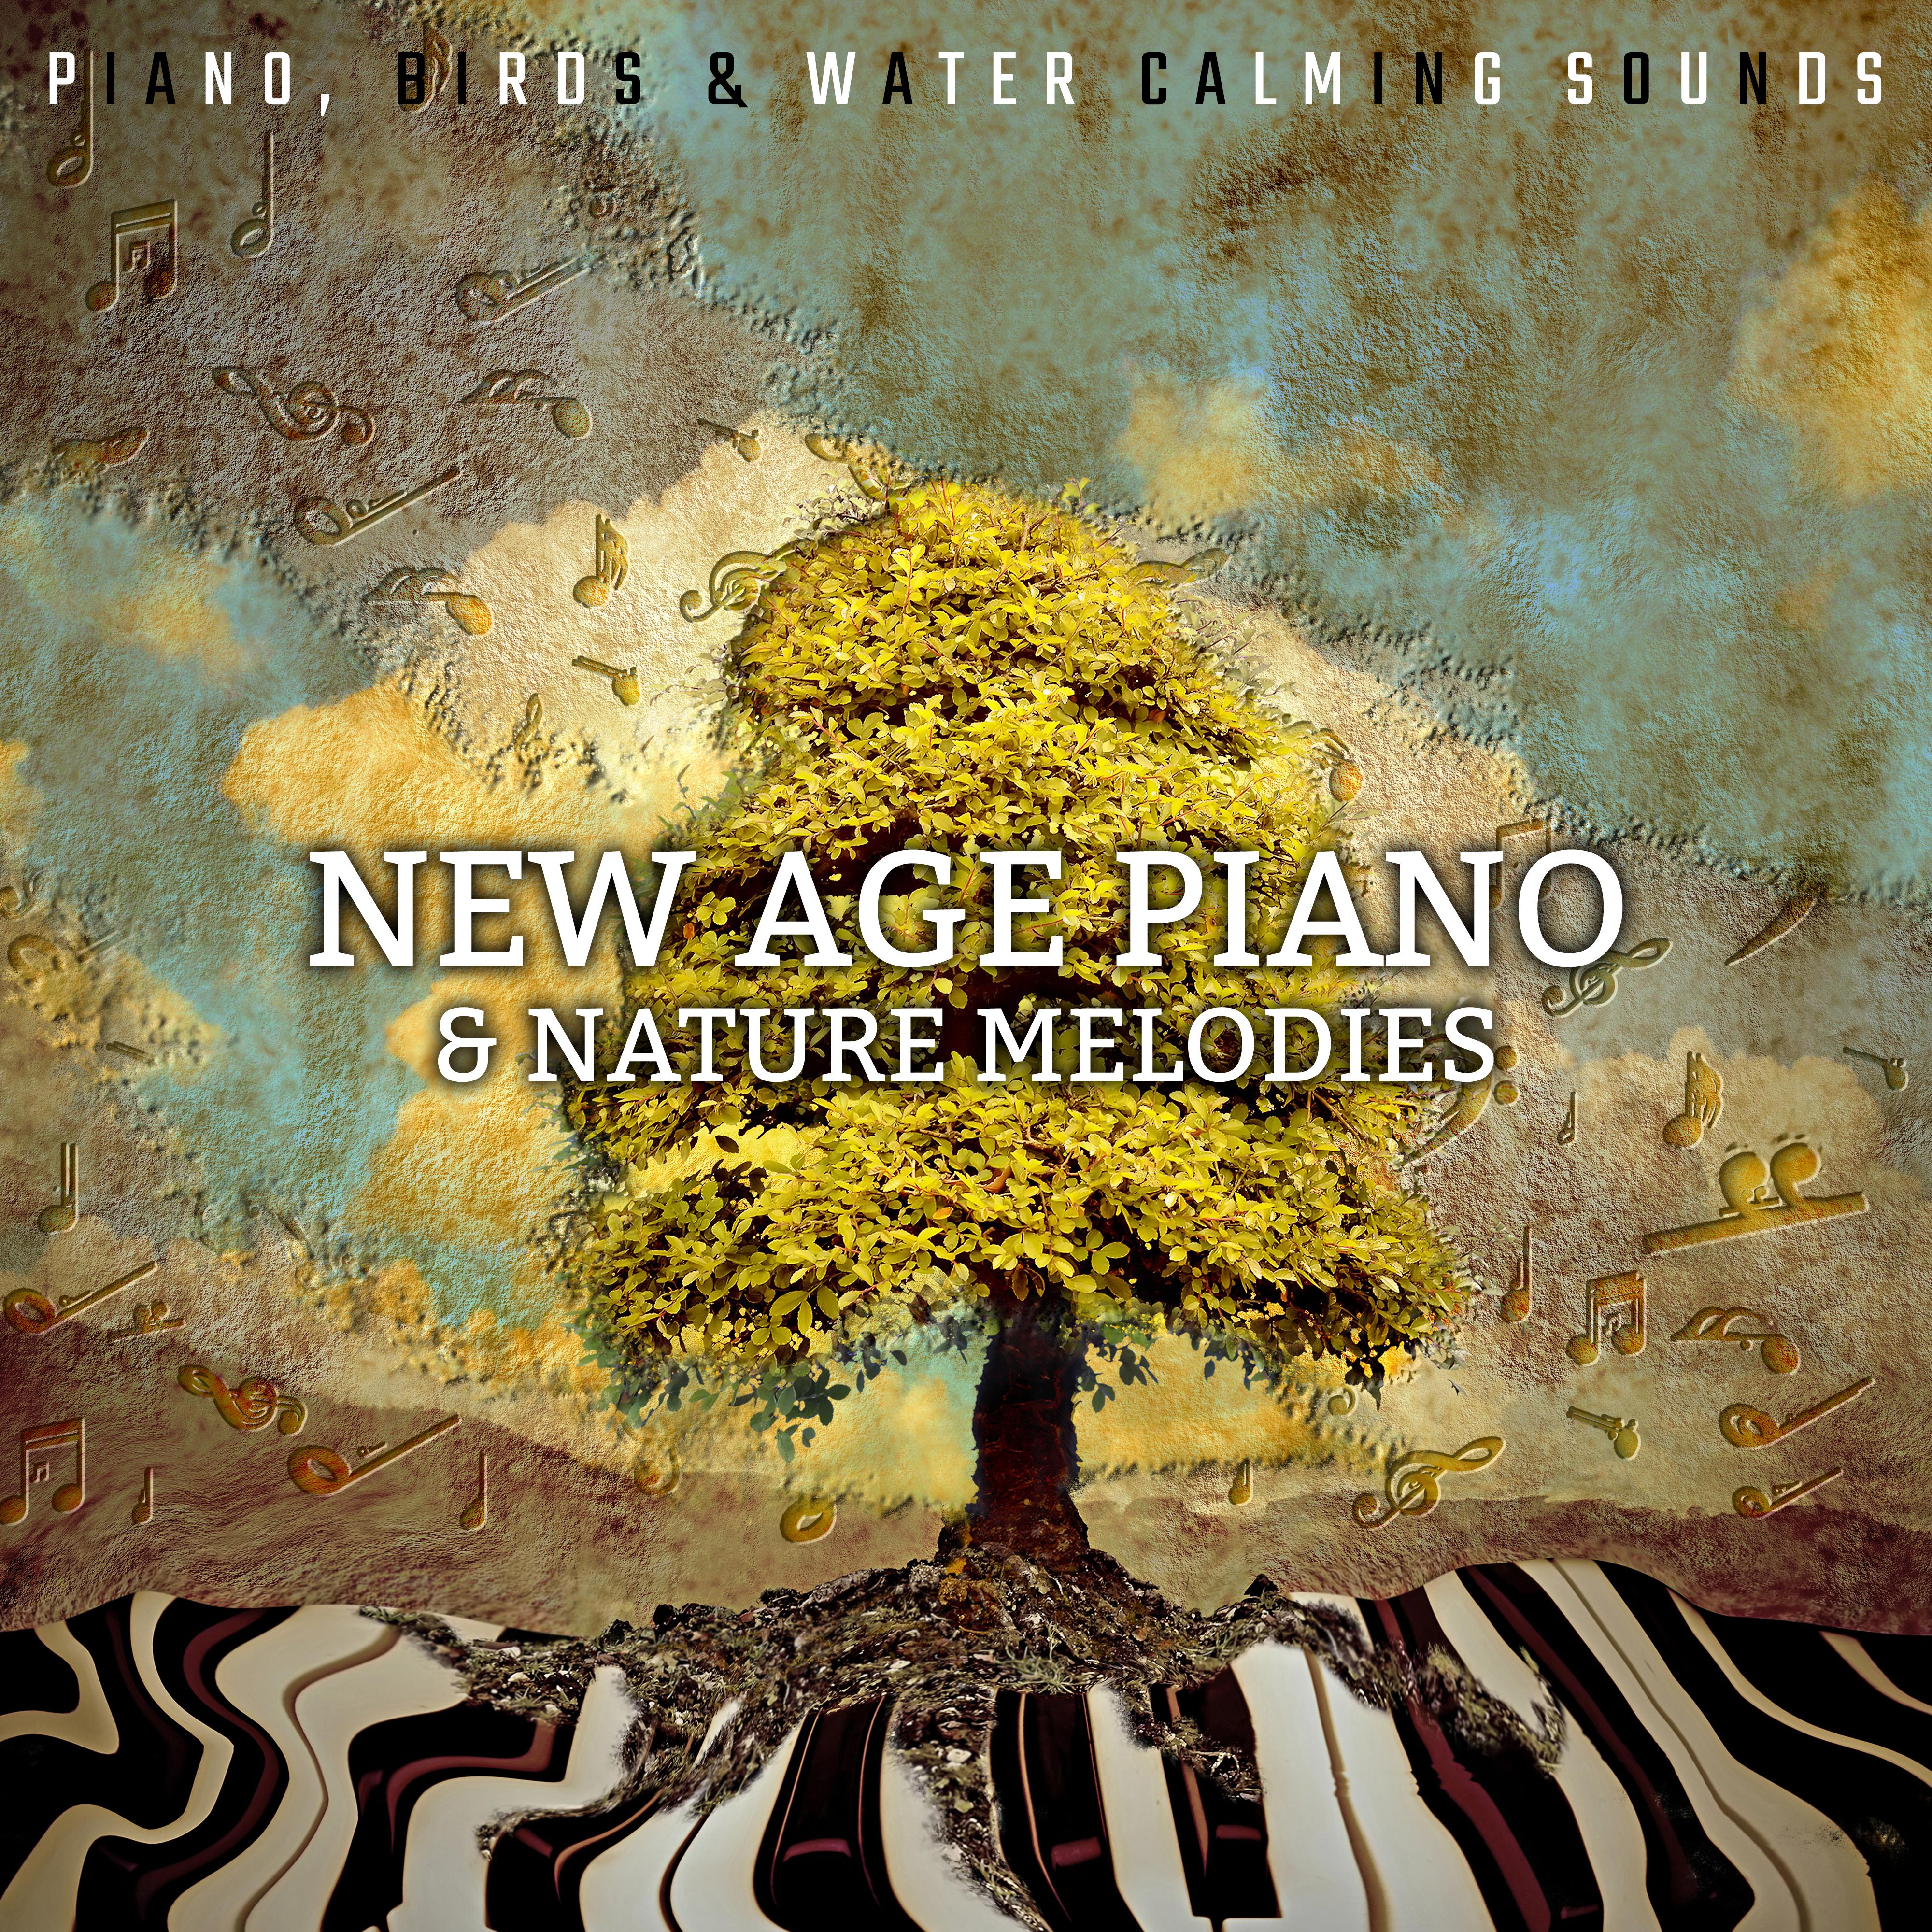 New Age Piano  Nature Melodies  Piano, Birds  Water Calming Sounds